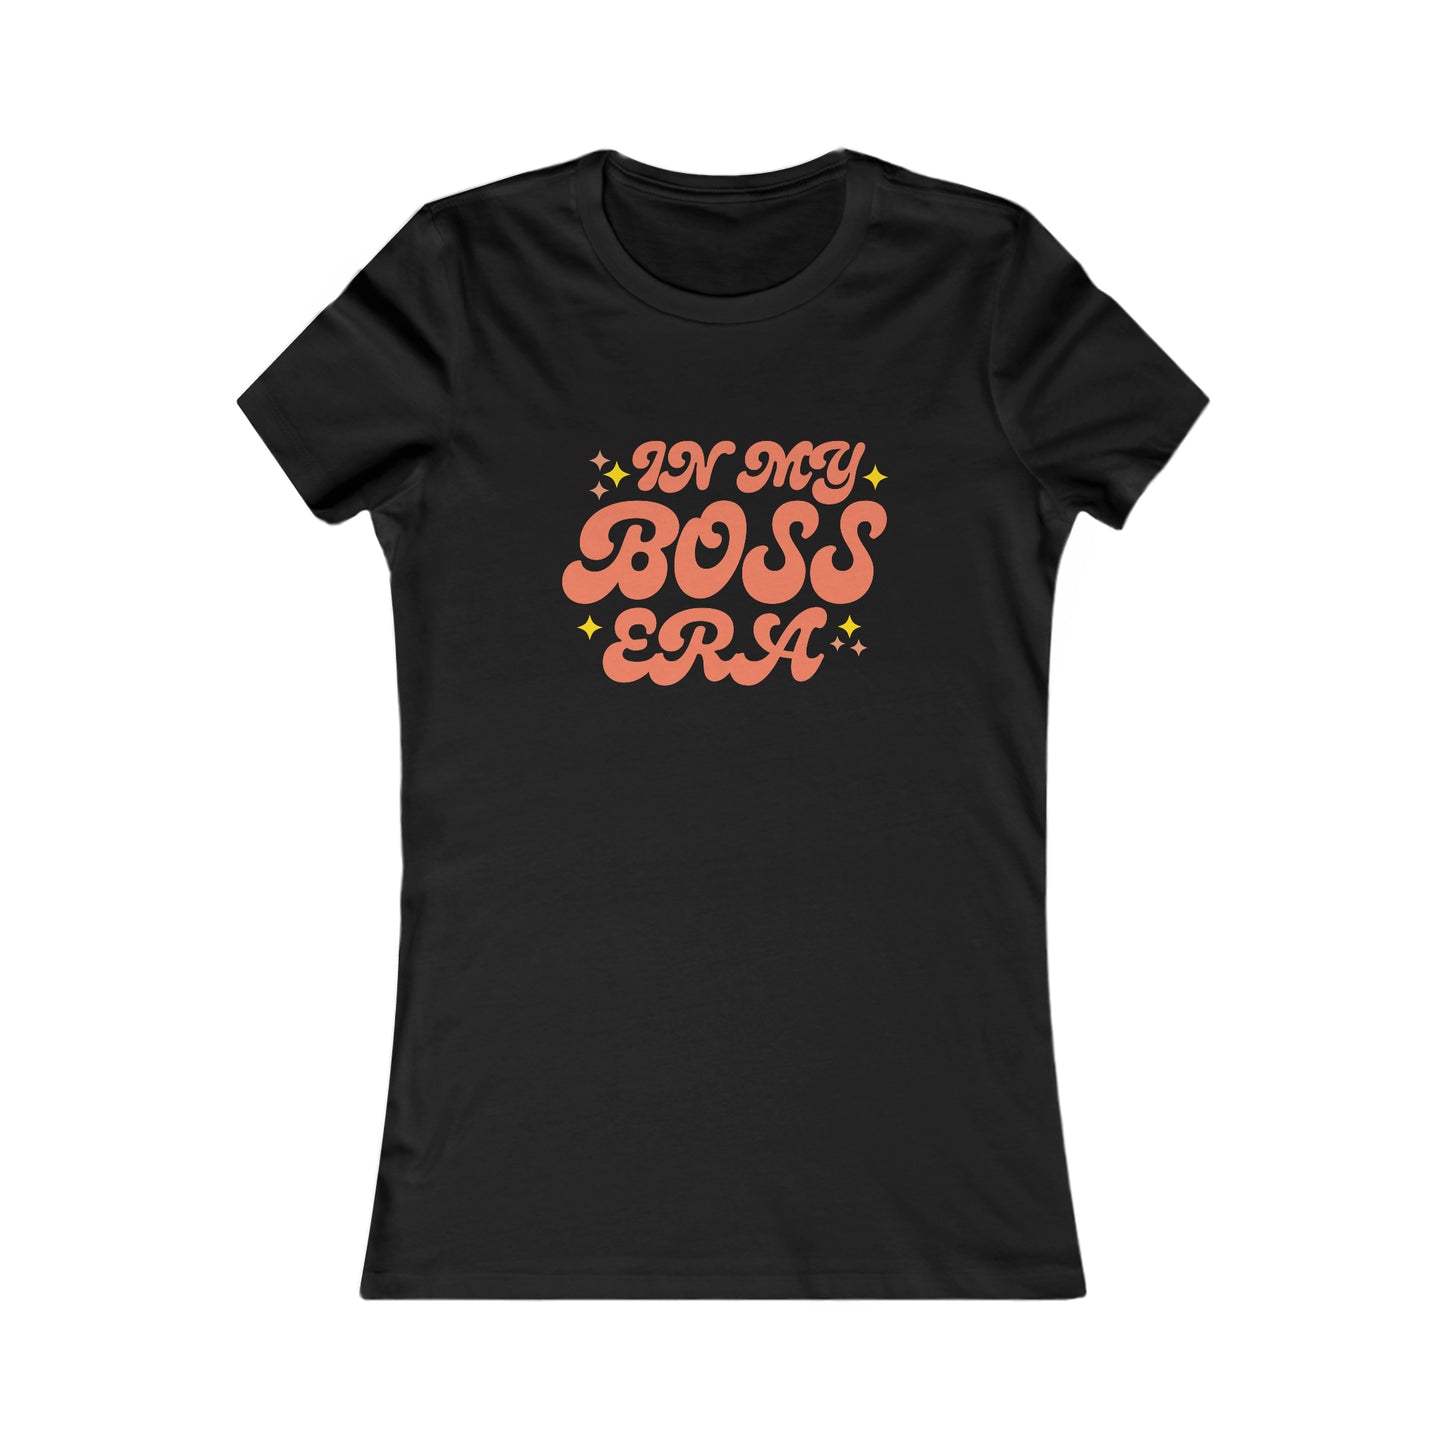 In My Boss Era - Women's High Quality Soft Blend Inspirational, EMPWRHER-Based Fashion Tee, ERA Collection, Women's Favorite Tees Printify